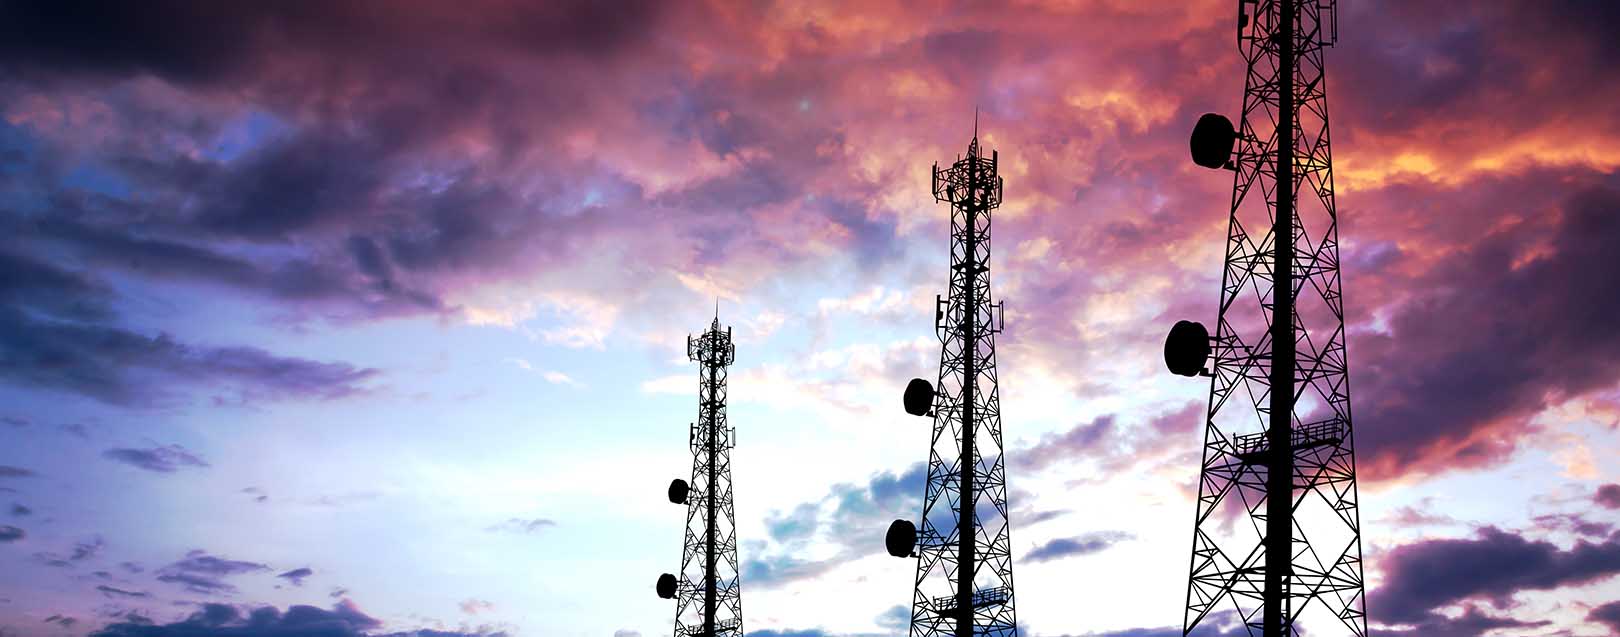 Airtel, American Tower inks deal to sell 1,350 towers in Tanzania